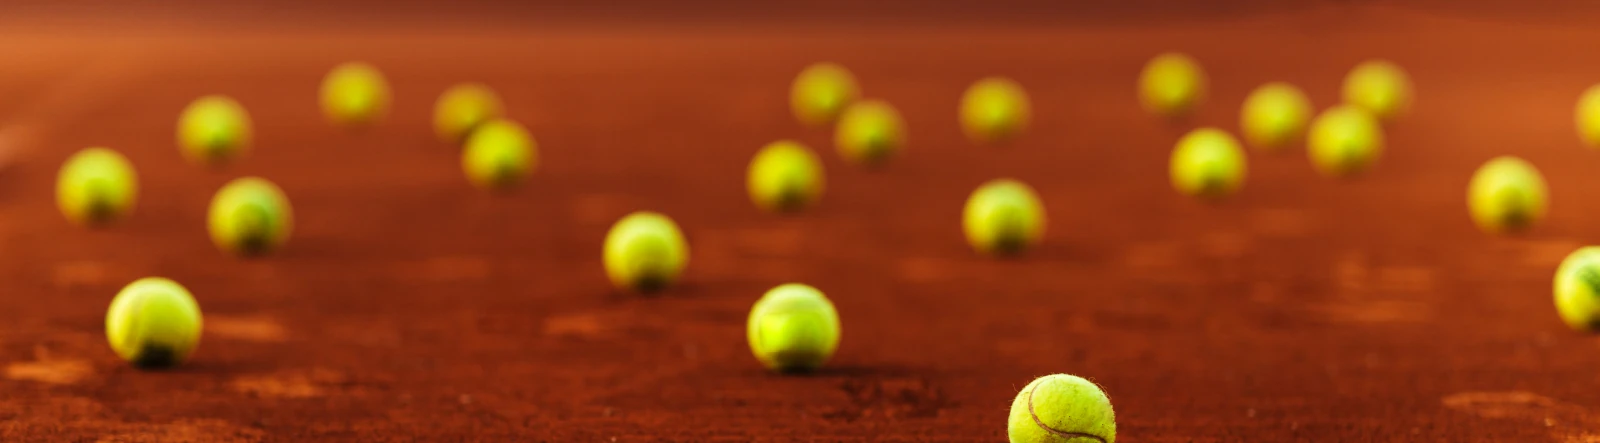 Several tennis balls laid out on a running track